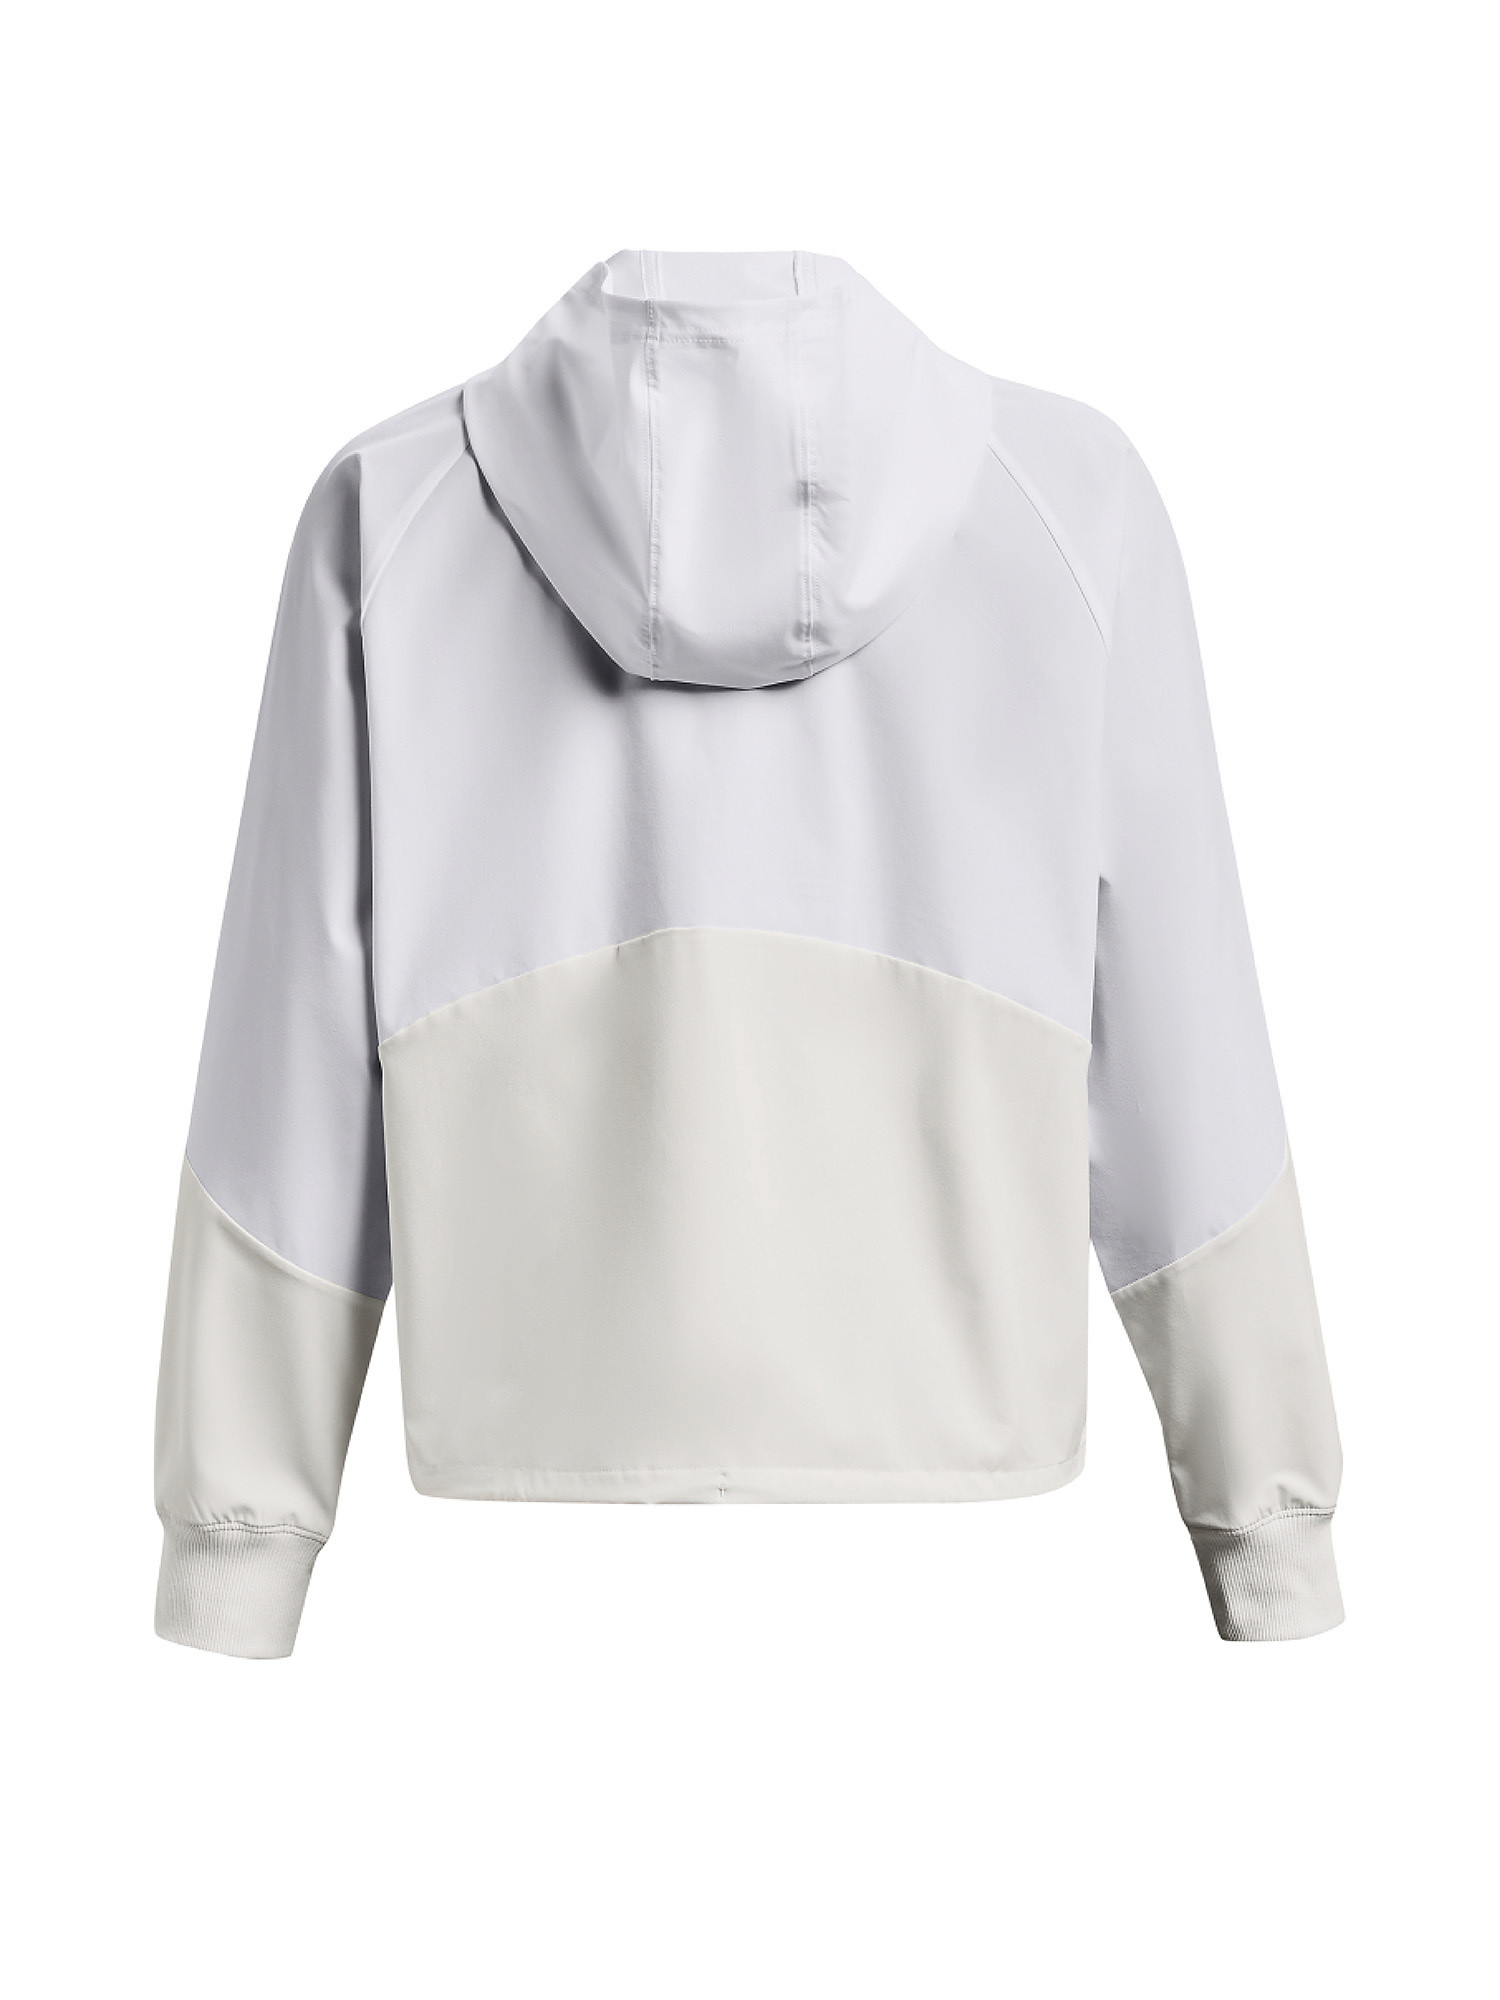 Under Armour - Giacca UA Woven Full-Zip, Bianco, large image number 1